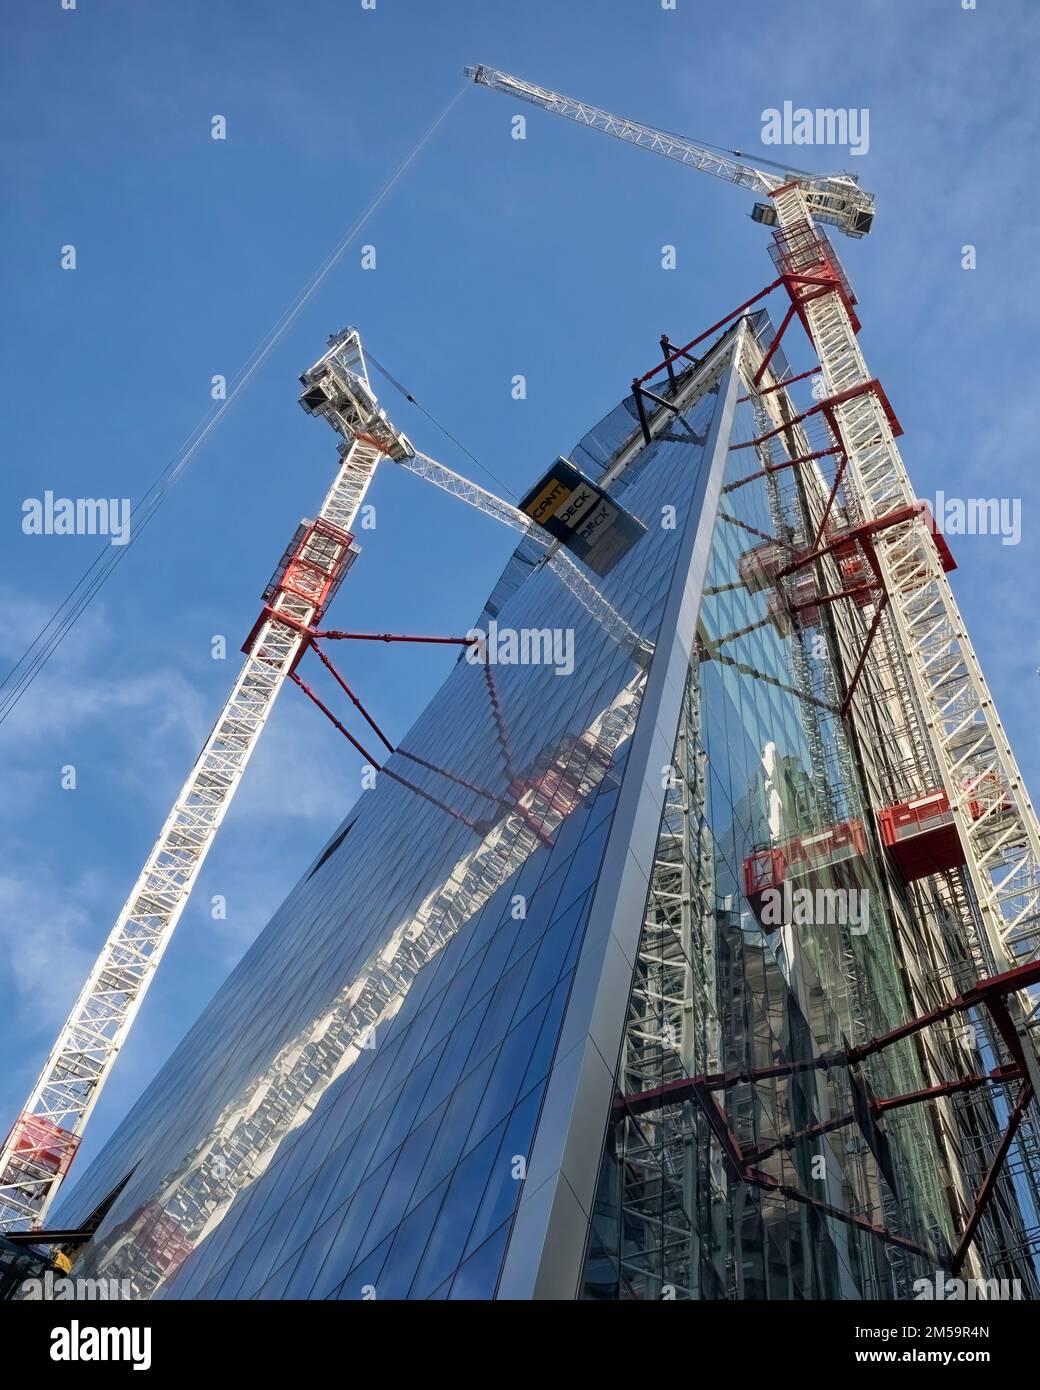 LONDON, UK - AUGUST 25, 2017:  Cranes  on Building Under Construction at 52 Lime Street.  Building also known as the Scalpel Stock Photo